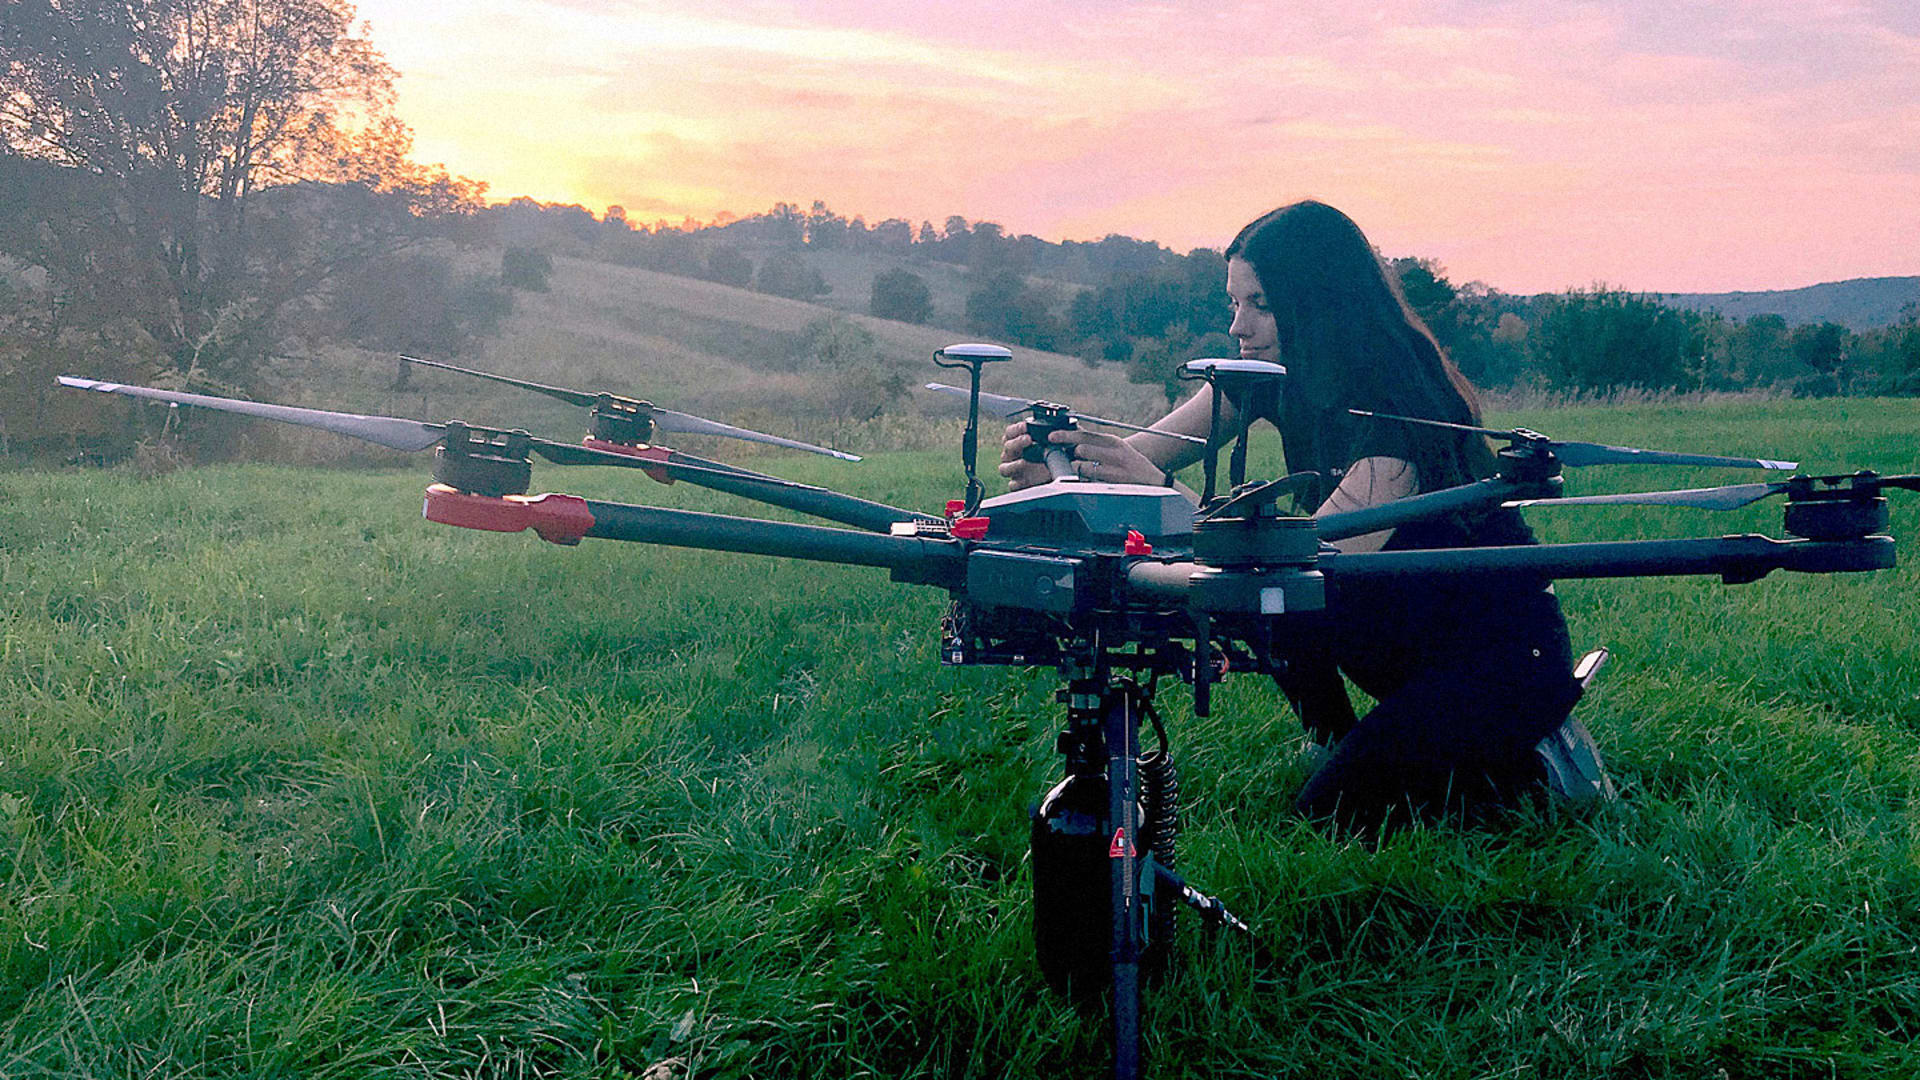 These drones will plant 40,000 trees in a month. By 2028, they’ll have planted 1 billion